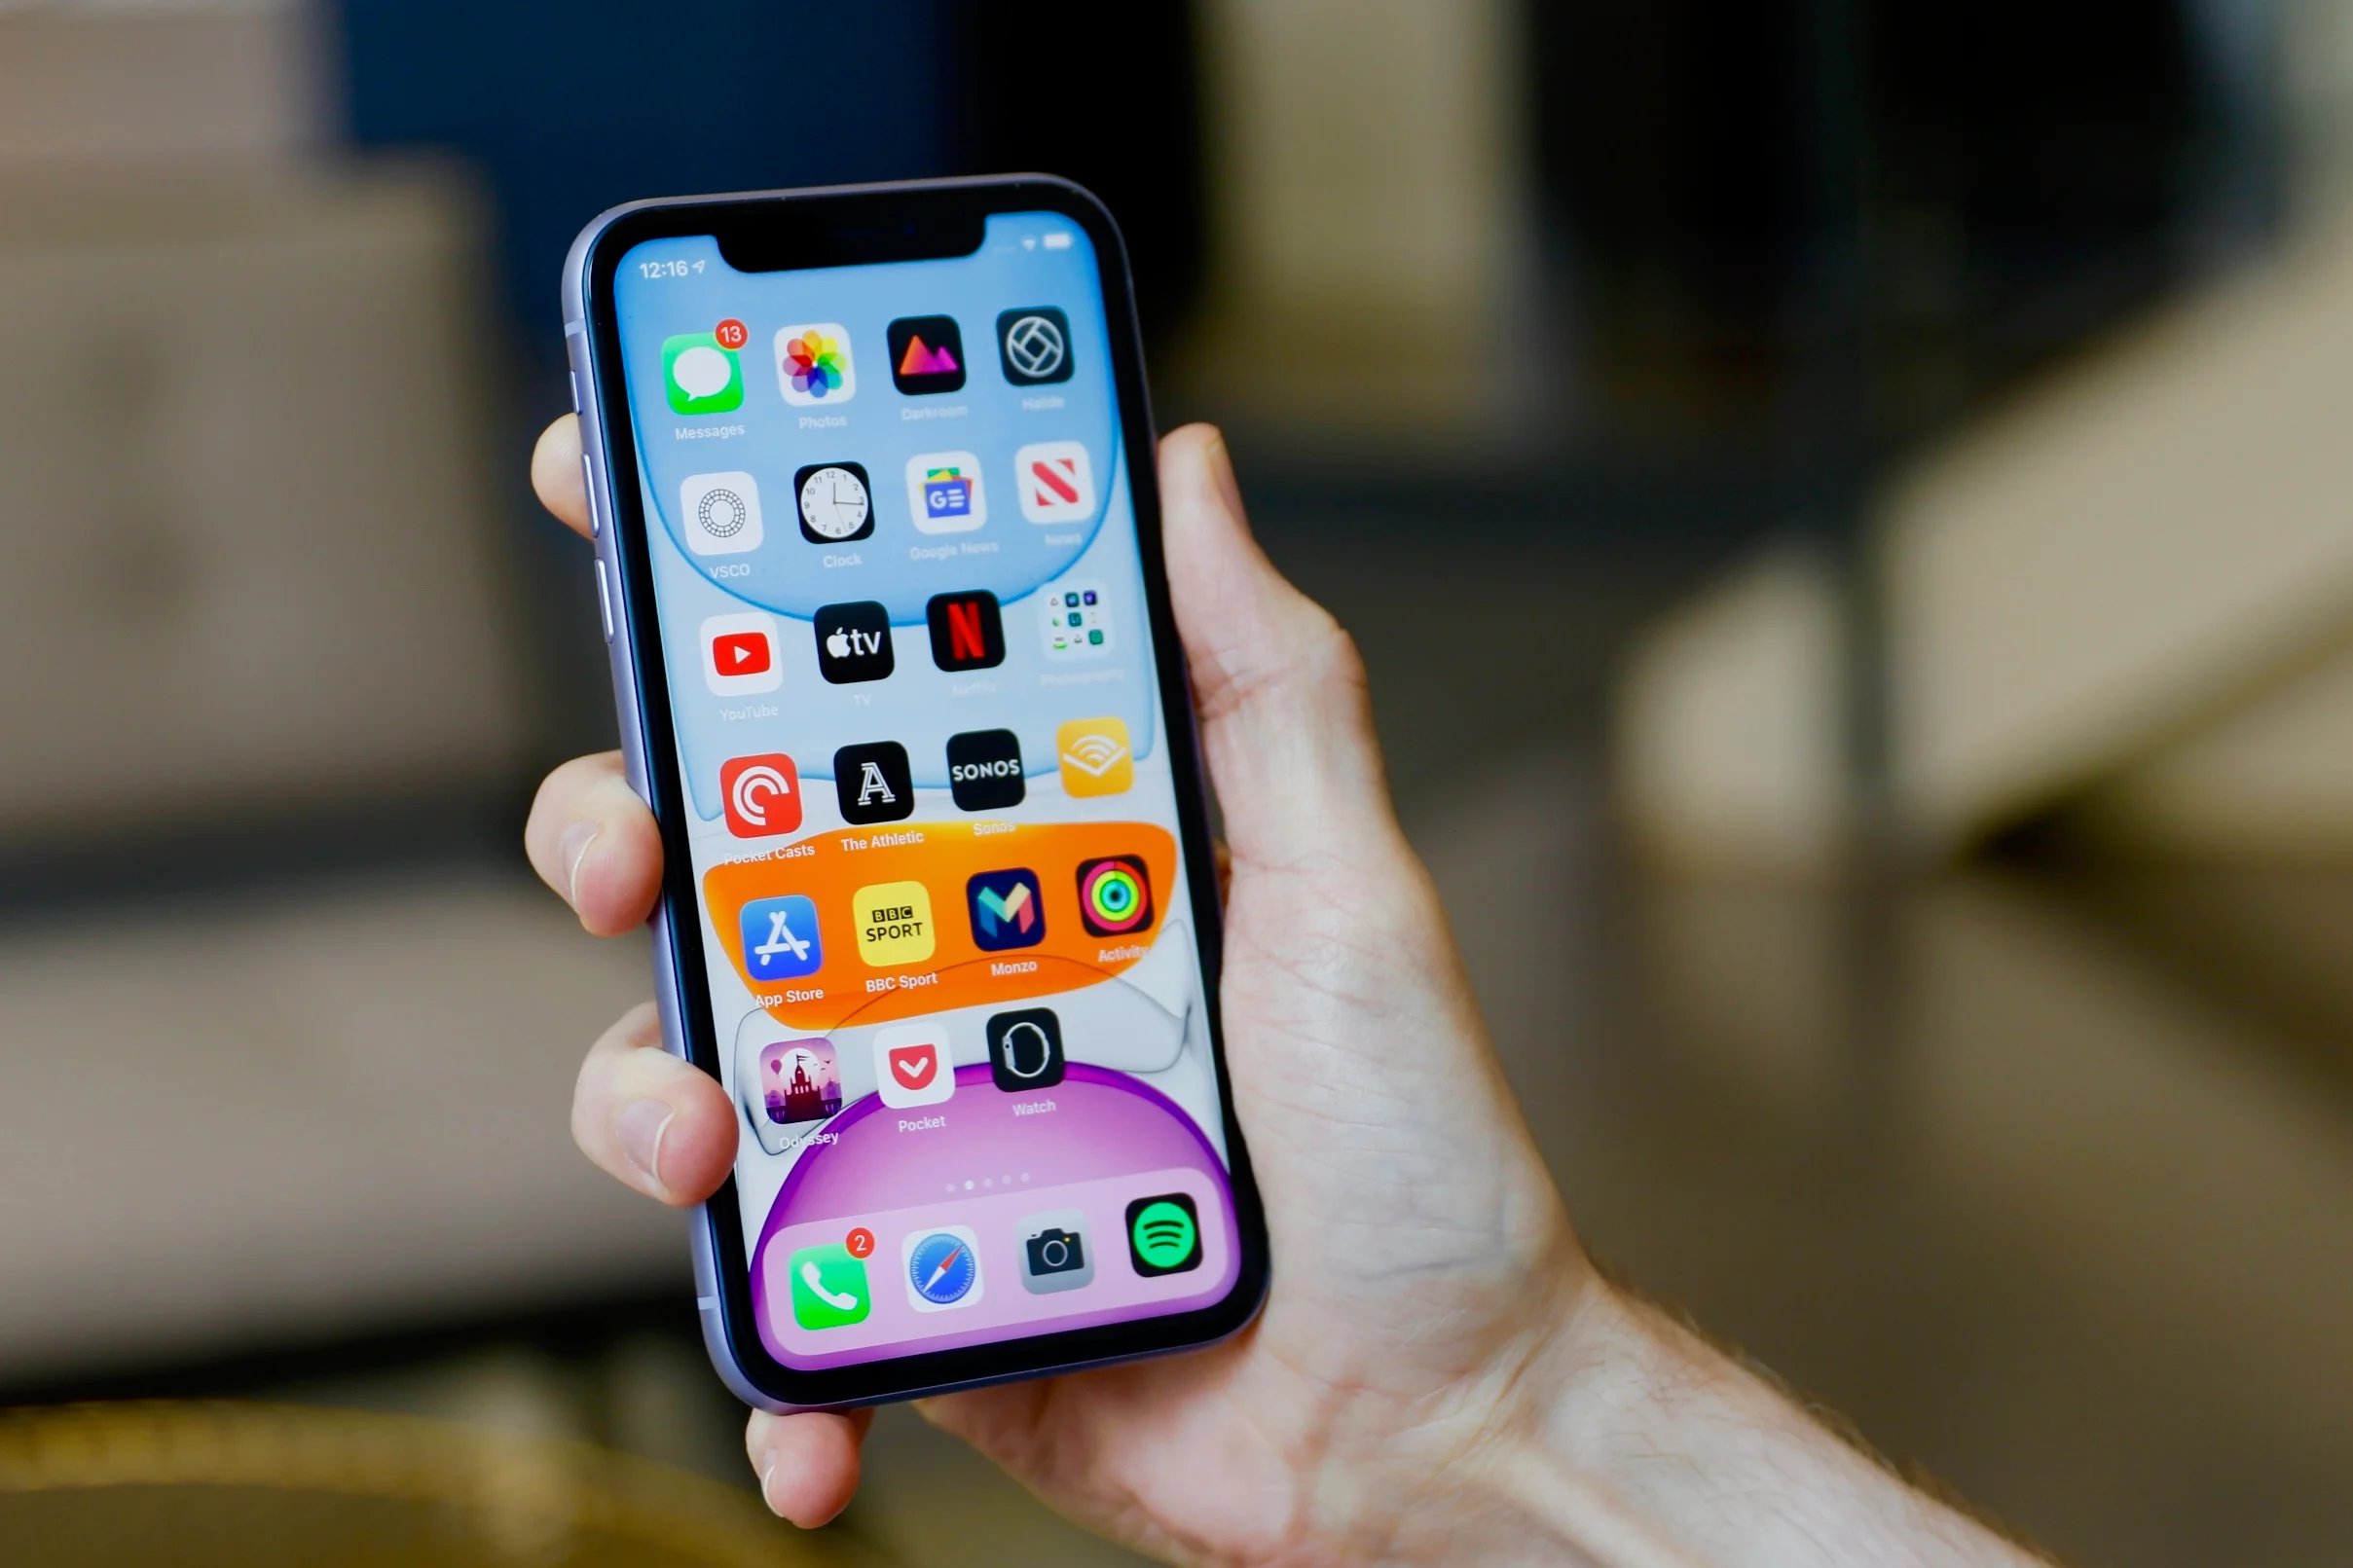 Black Screen Troubleshooting: Resolving Display Issues On IPhone 11